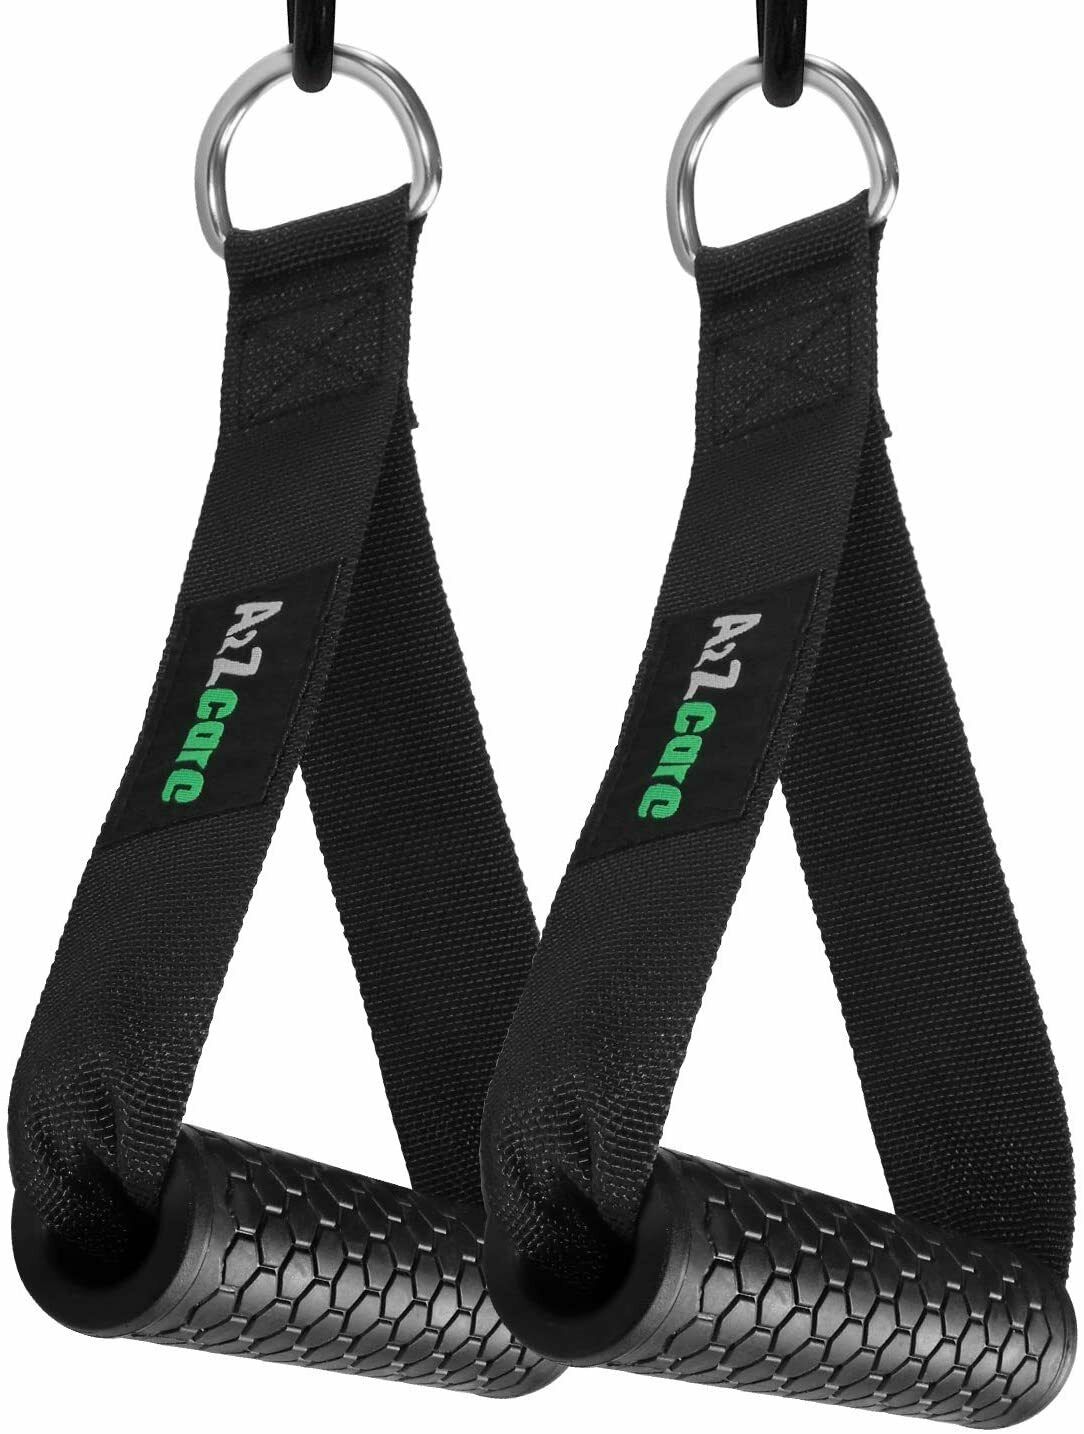 A2zcare Gym Attachment Handle /exercise Handle For Cable Machines (set Of 2)